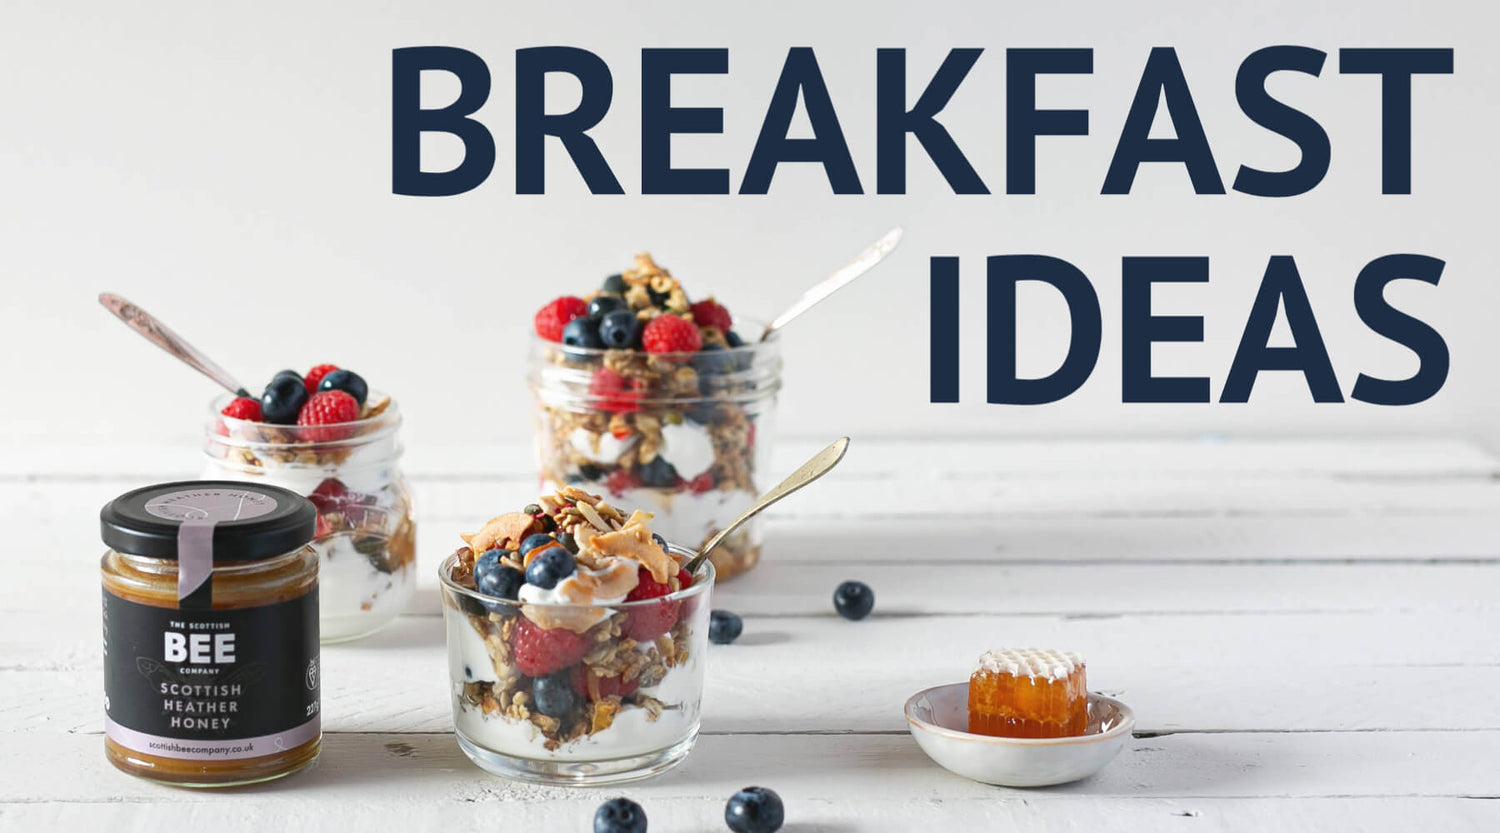 heather honey with granola and fruit bowls with text 'breakfast ideas'